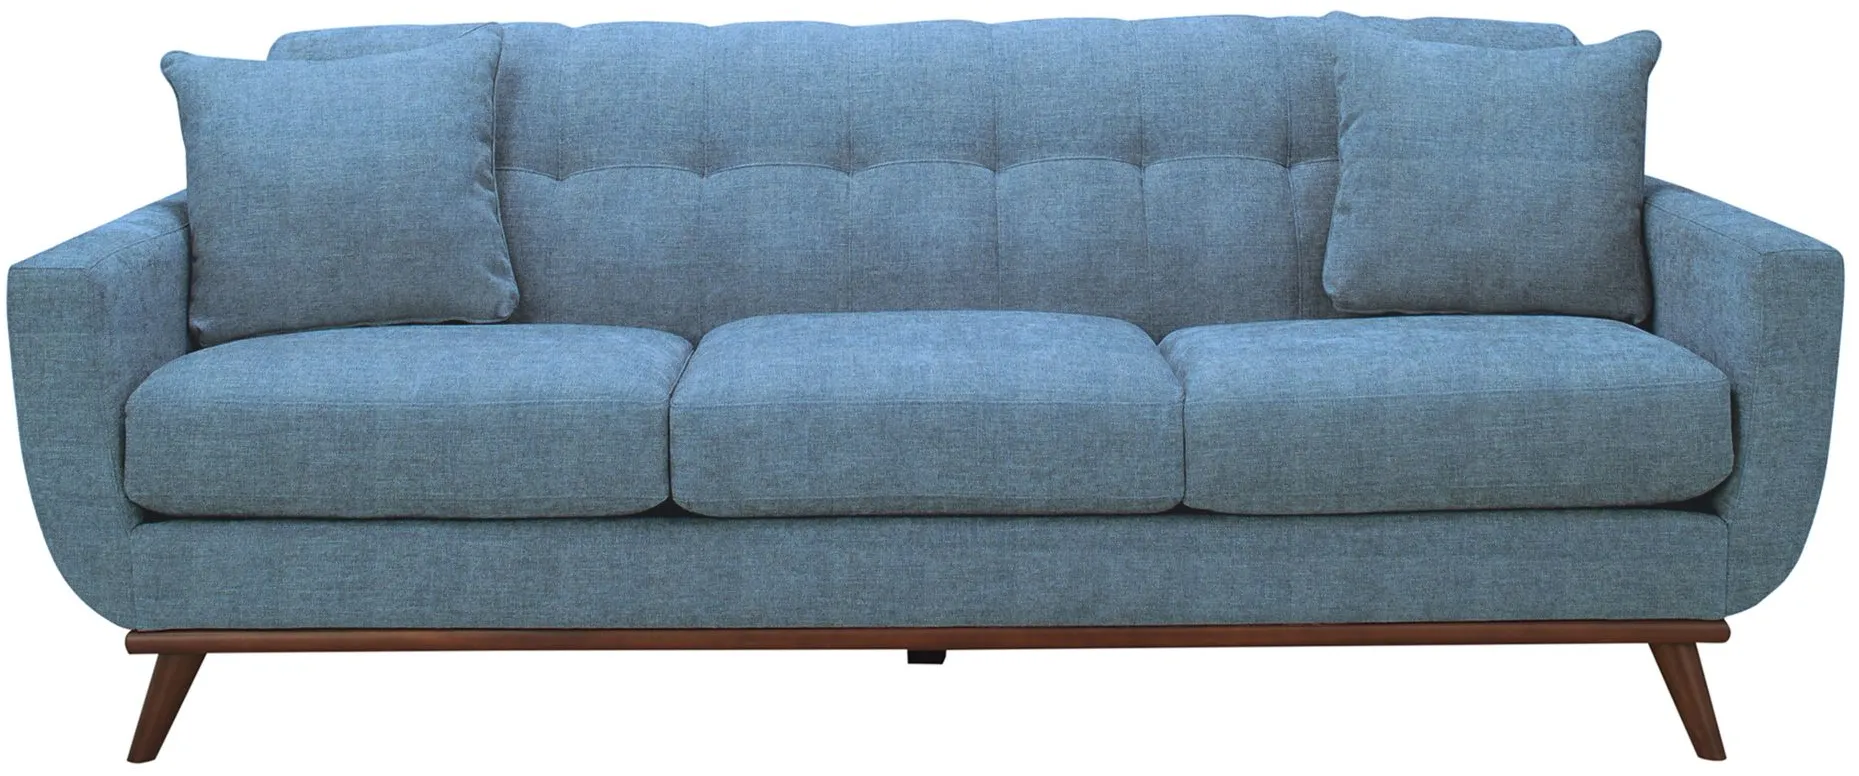 Milo Sofa in Elliot French Blue by H.M. Richards